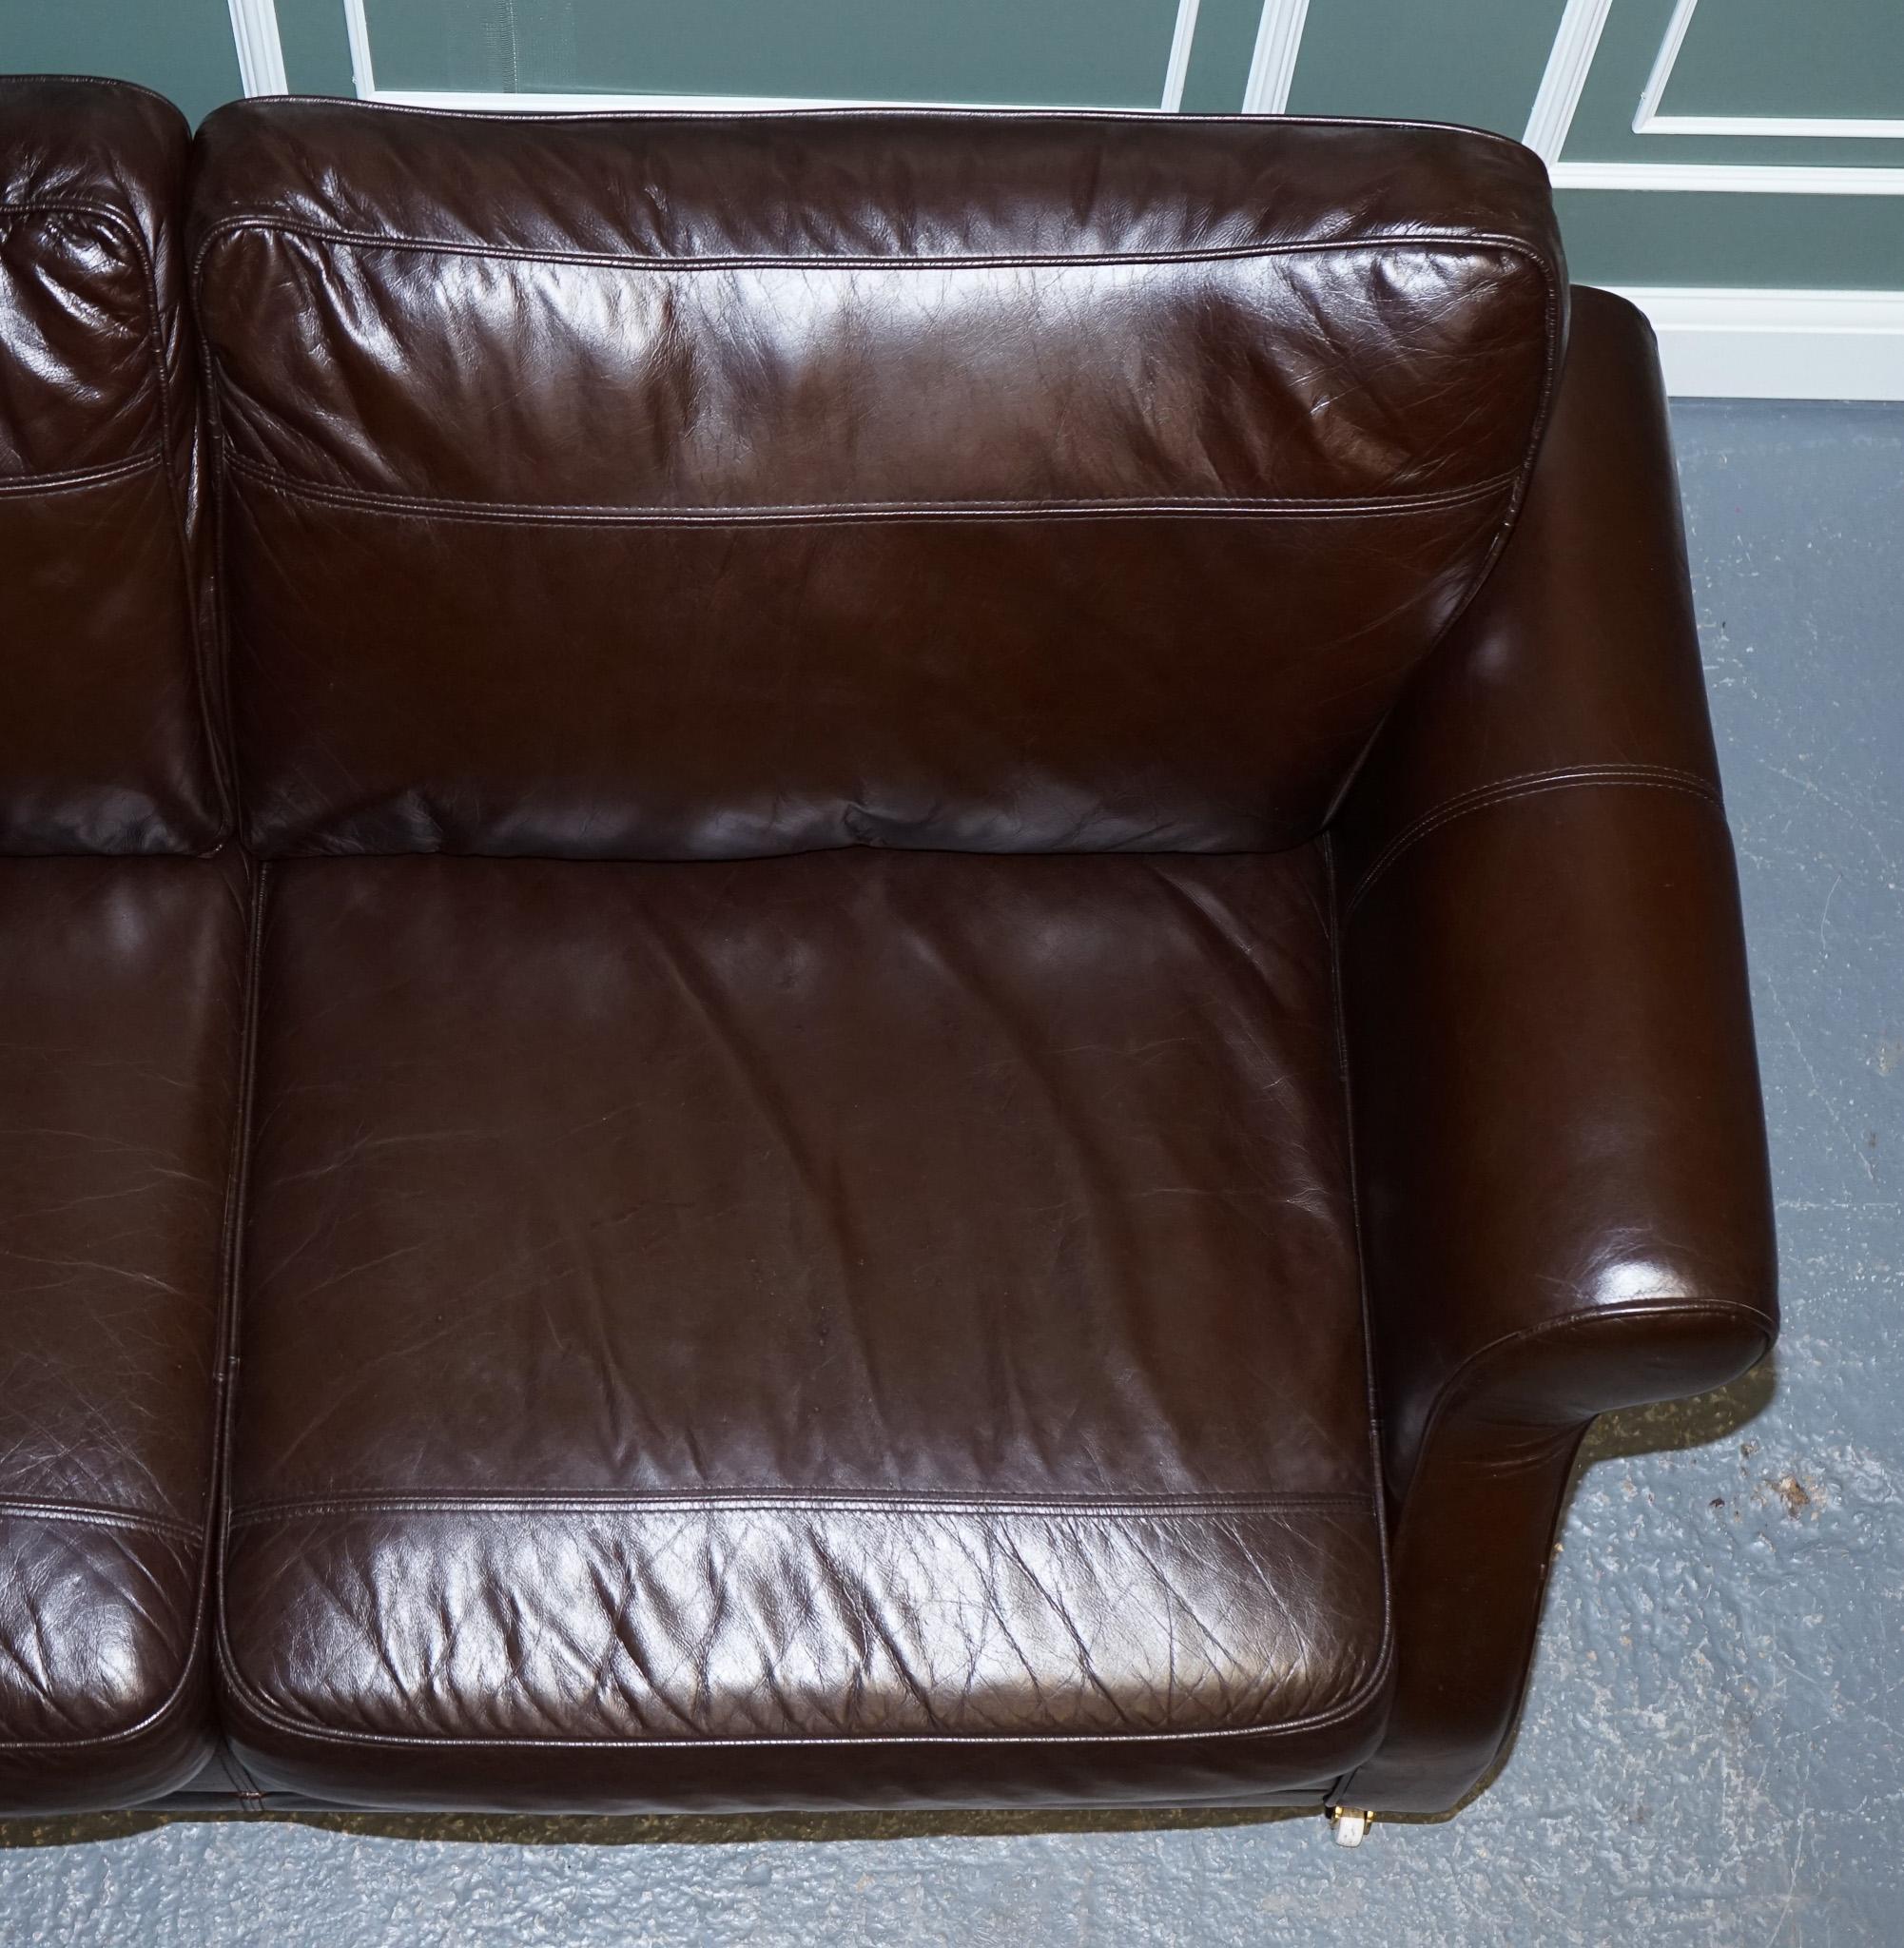 SOFA VINTAGE STUNNiNG CHOCOLATE BROWN LEATHER 2 TO 3 SEATER en vente 3